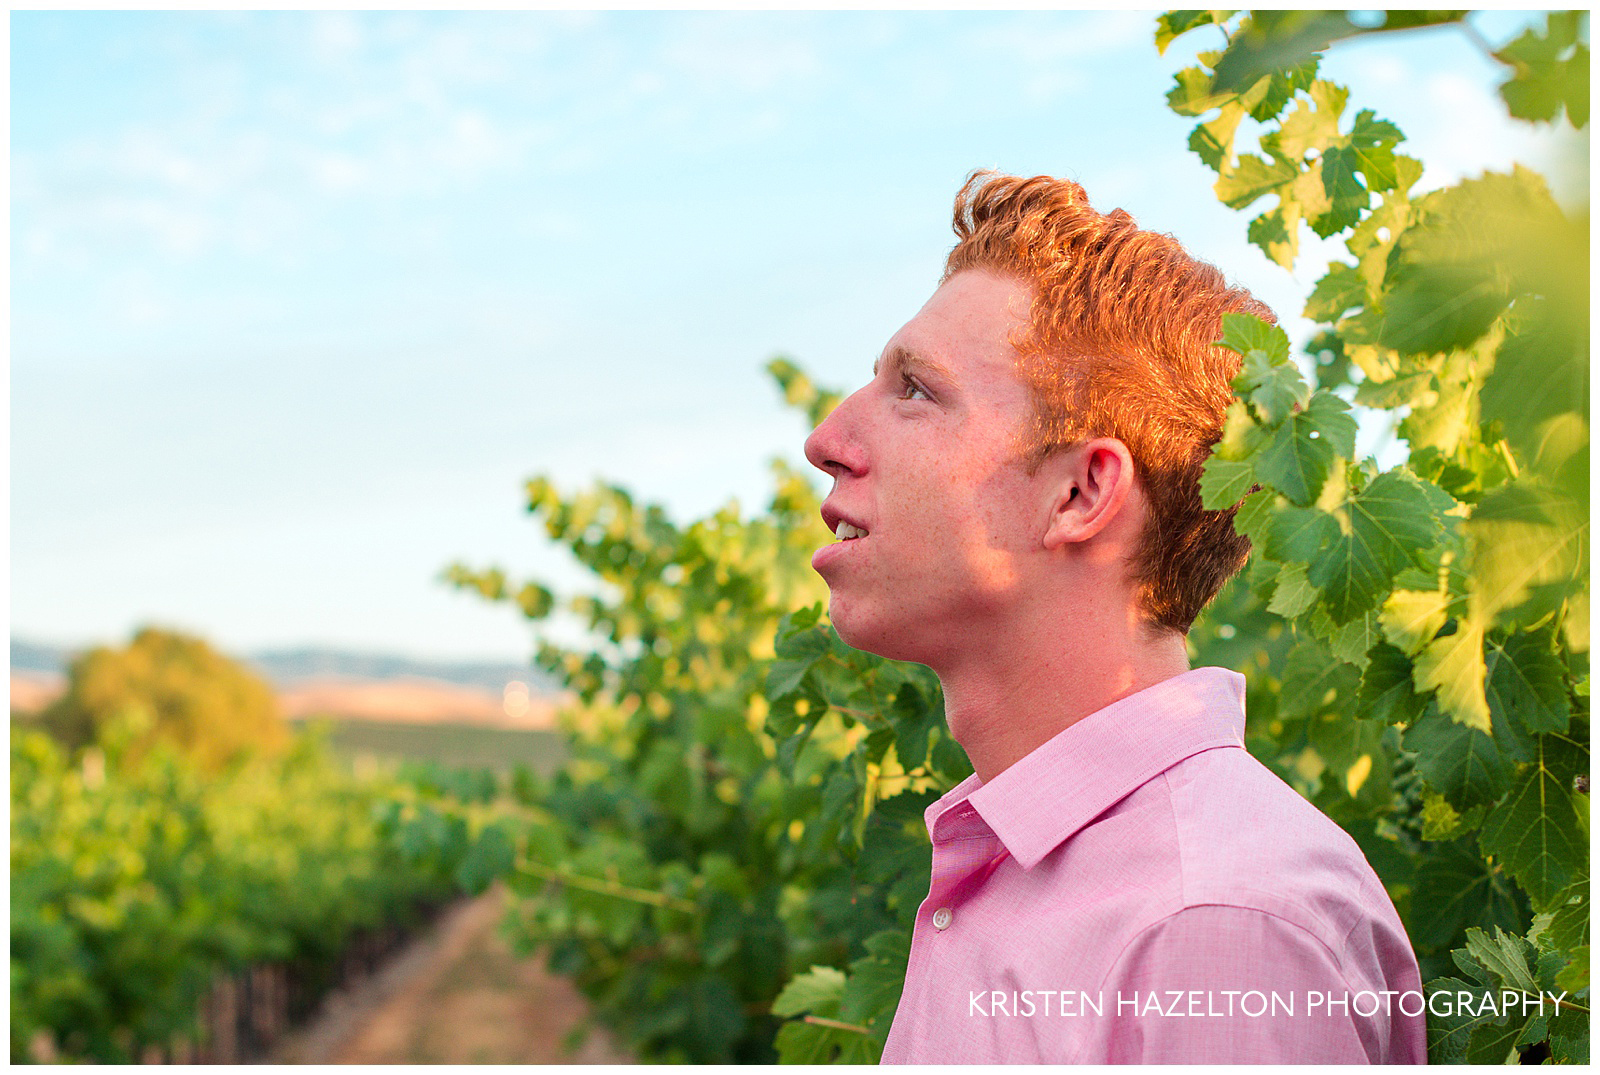 Senior portrait of a boy looking up at the sky in a vineyard